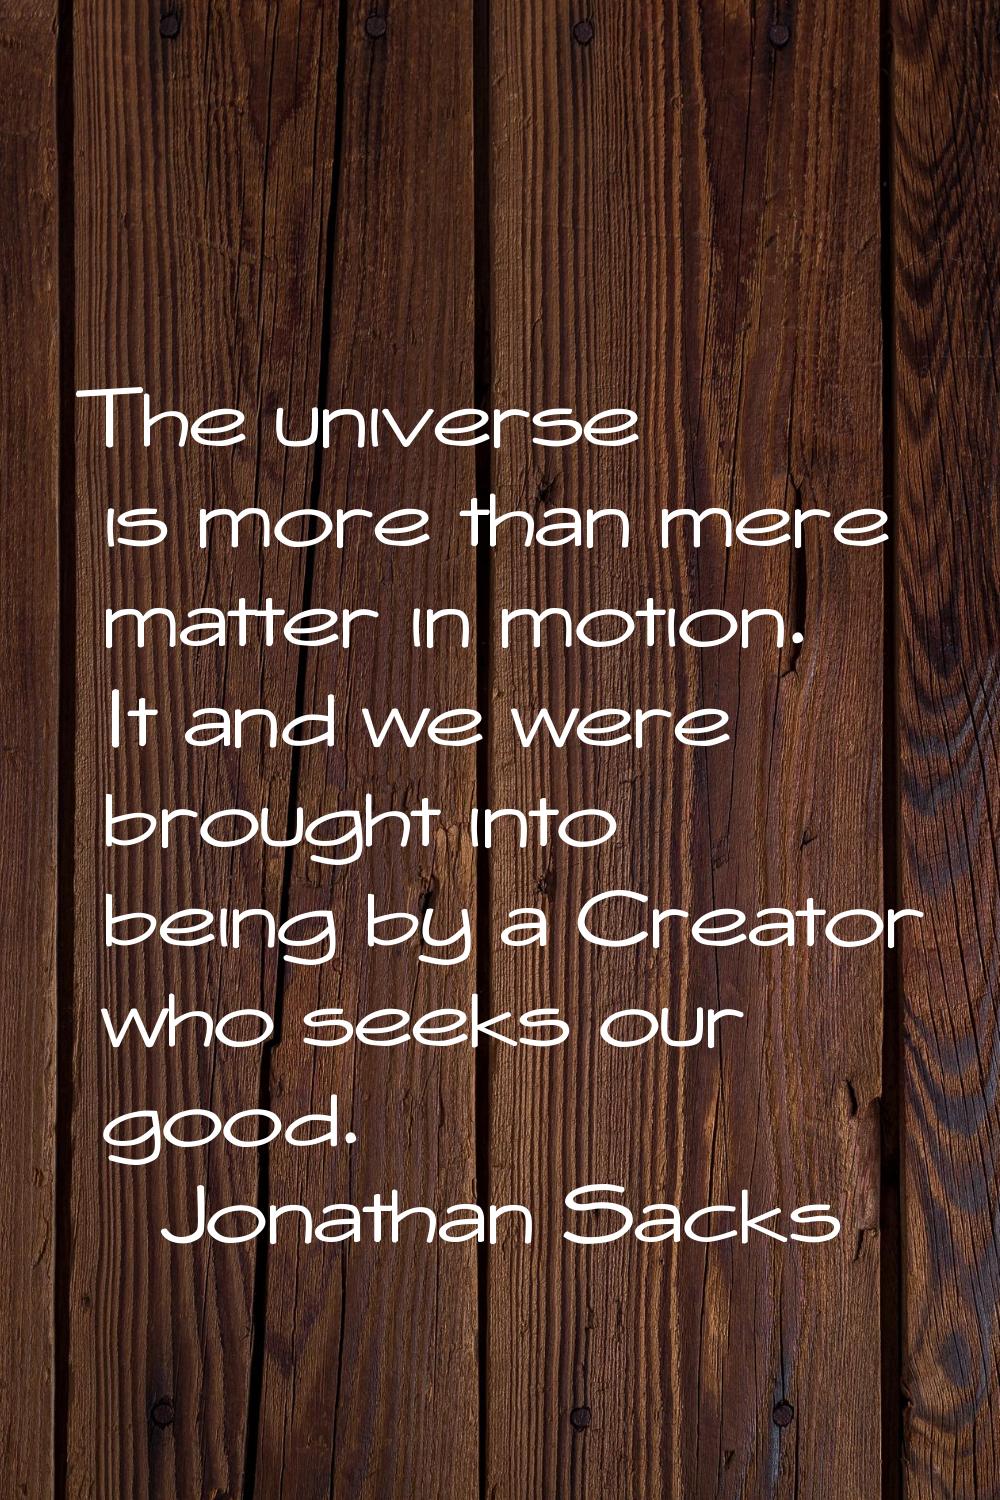 The universe is more than mere matter in motion. It and we were brought into being by a Creator who